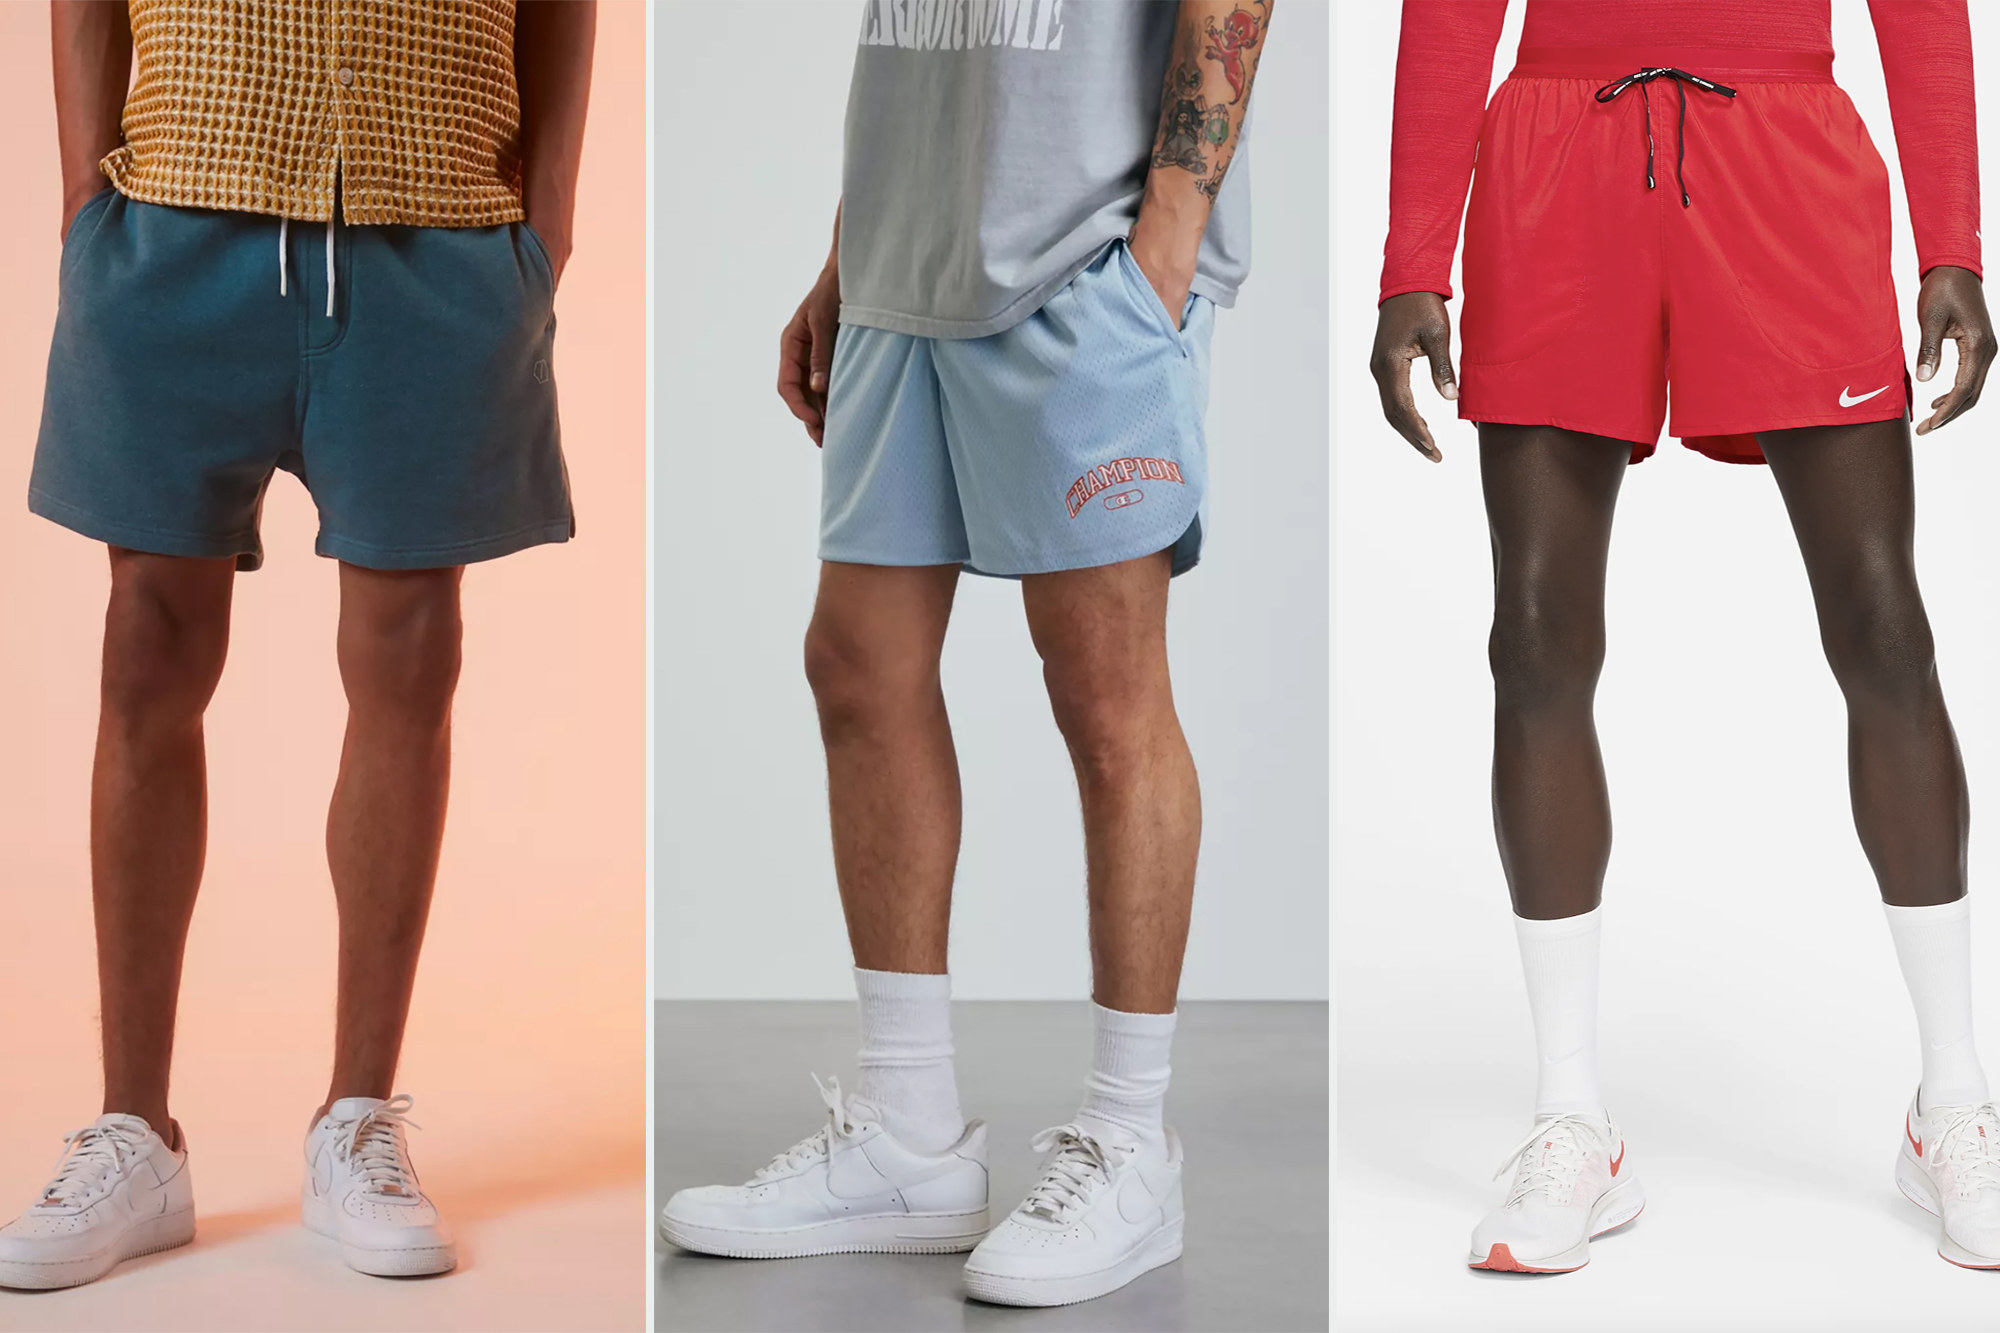 Thighs Out, Boys: Short Shorts for Men Are Back This Spring